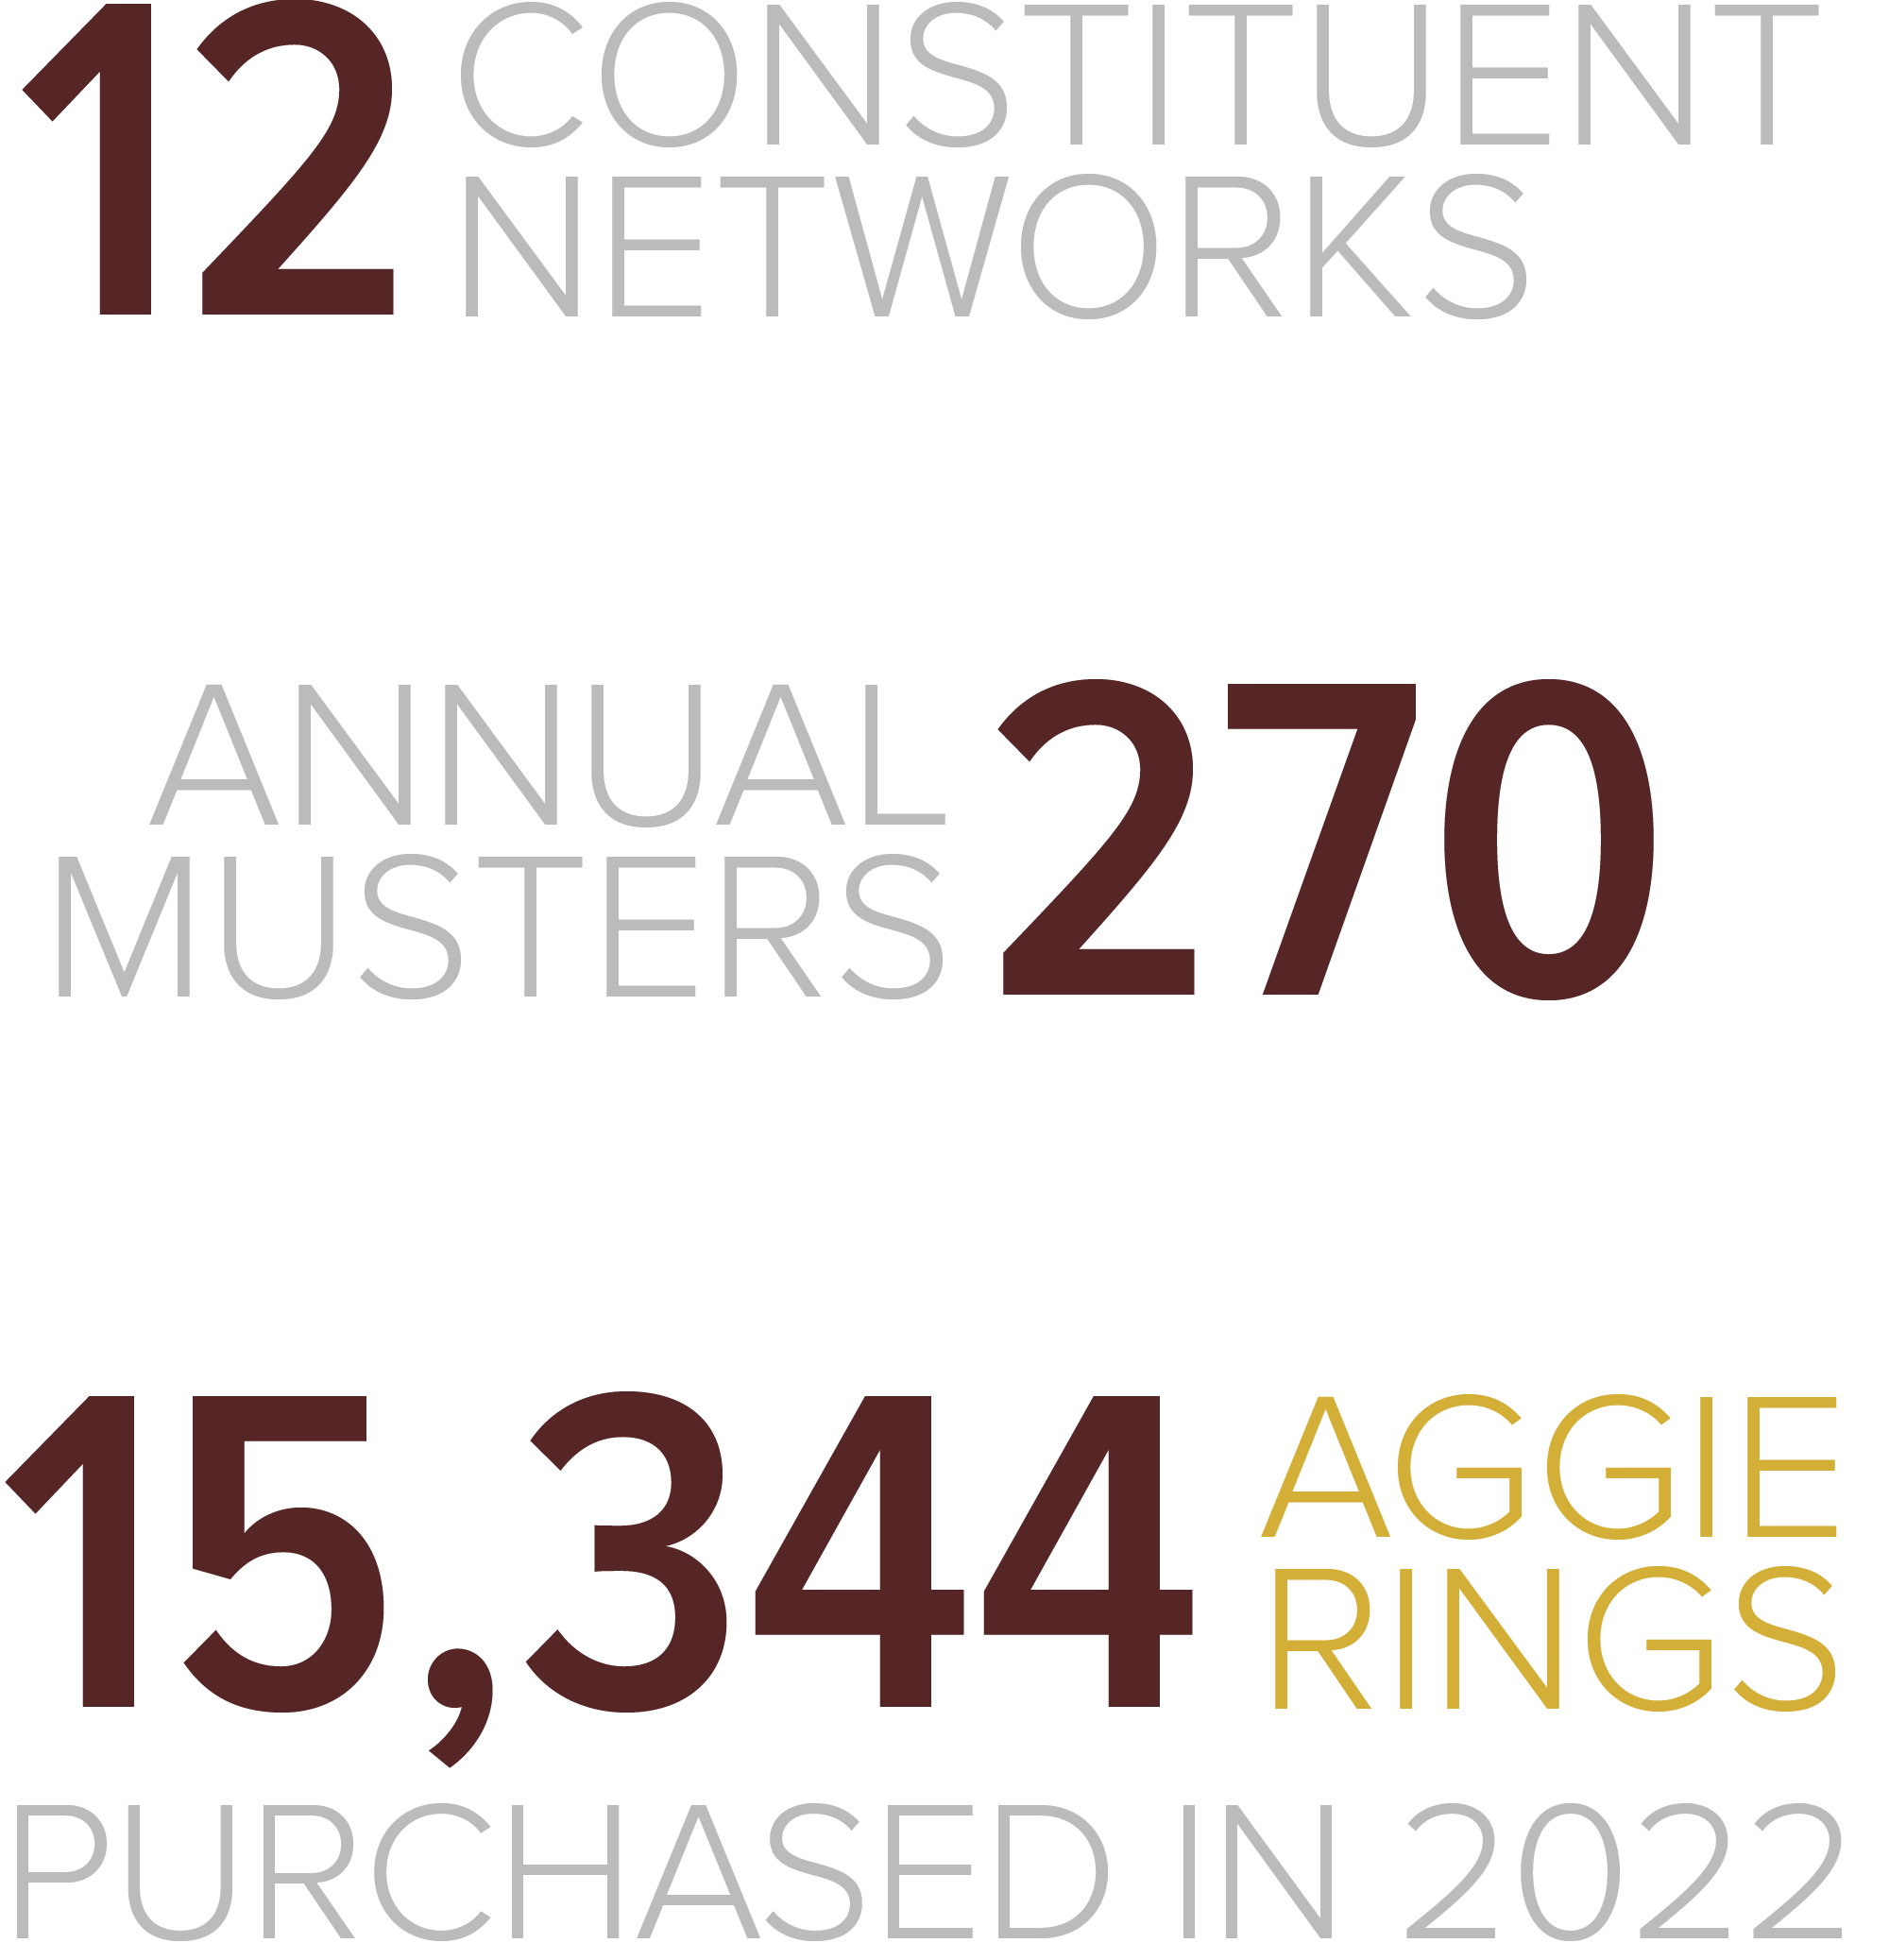 The Aggie Network has 11 constituent networks, supports over 300 annual Aggie Musters, and 15,264 Aggie Rings were purchased in 2019.